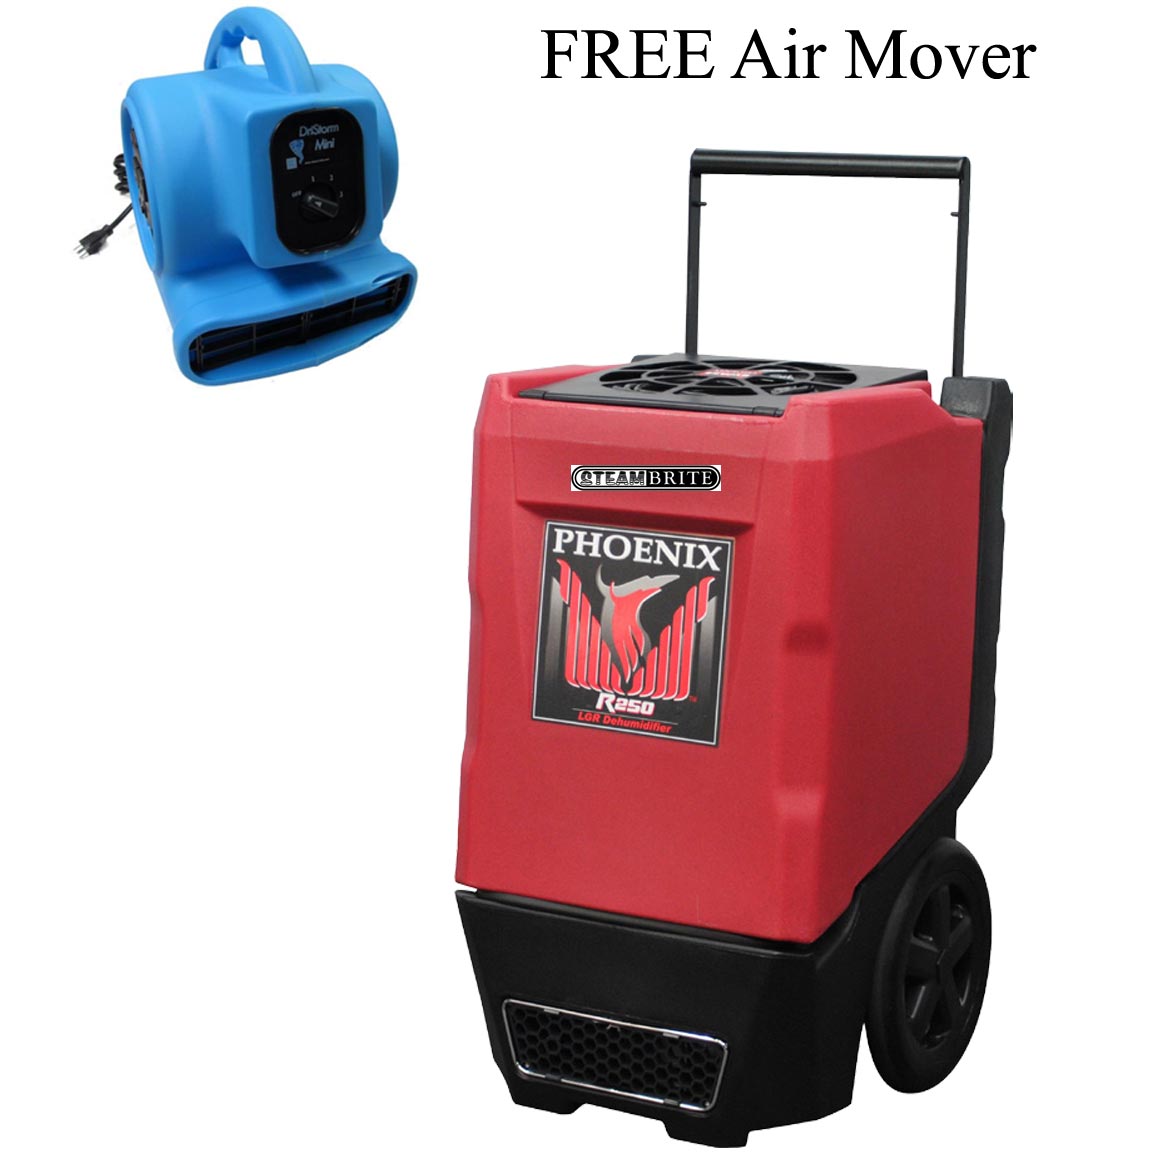 Phoenix R250 Industrial Restoration Dehumidifier- Red- 4034460 Air Mover Included